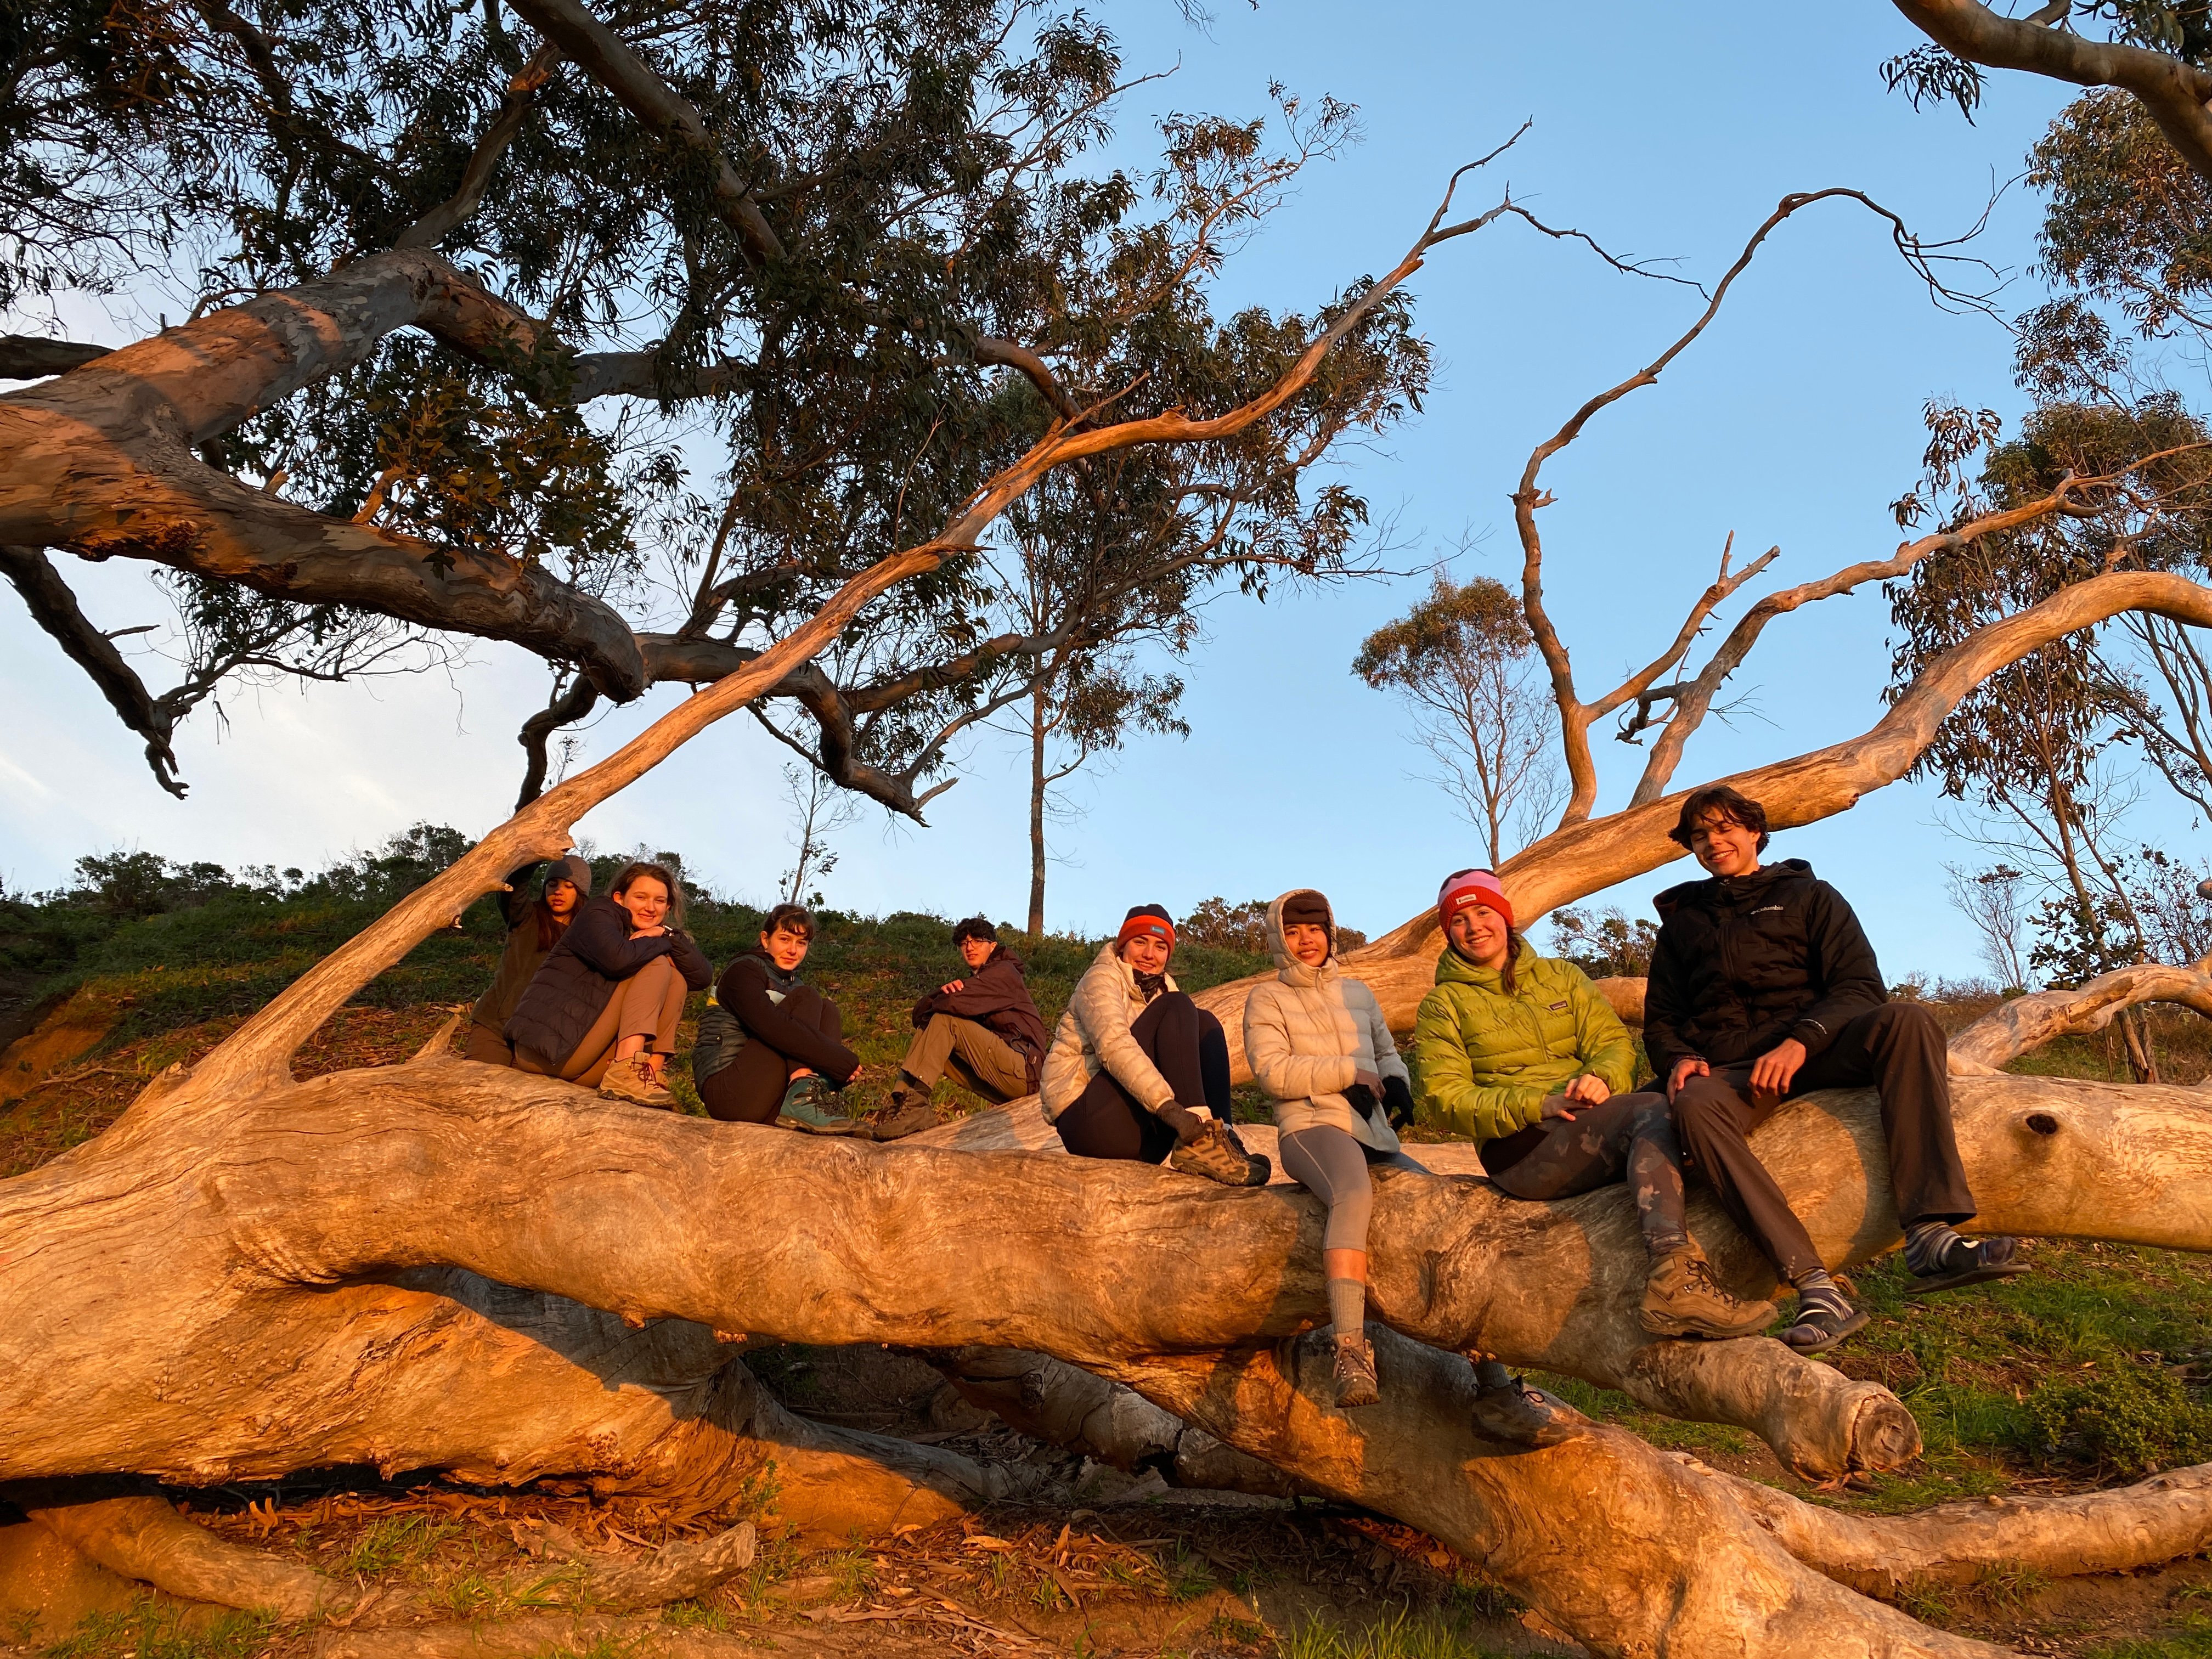 Students taking a group shot sitting on a downed tree during the sunset.